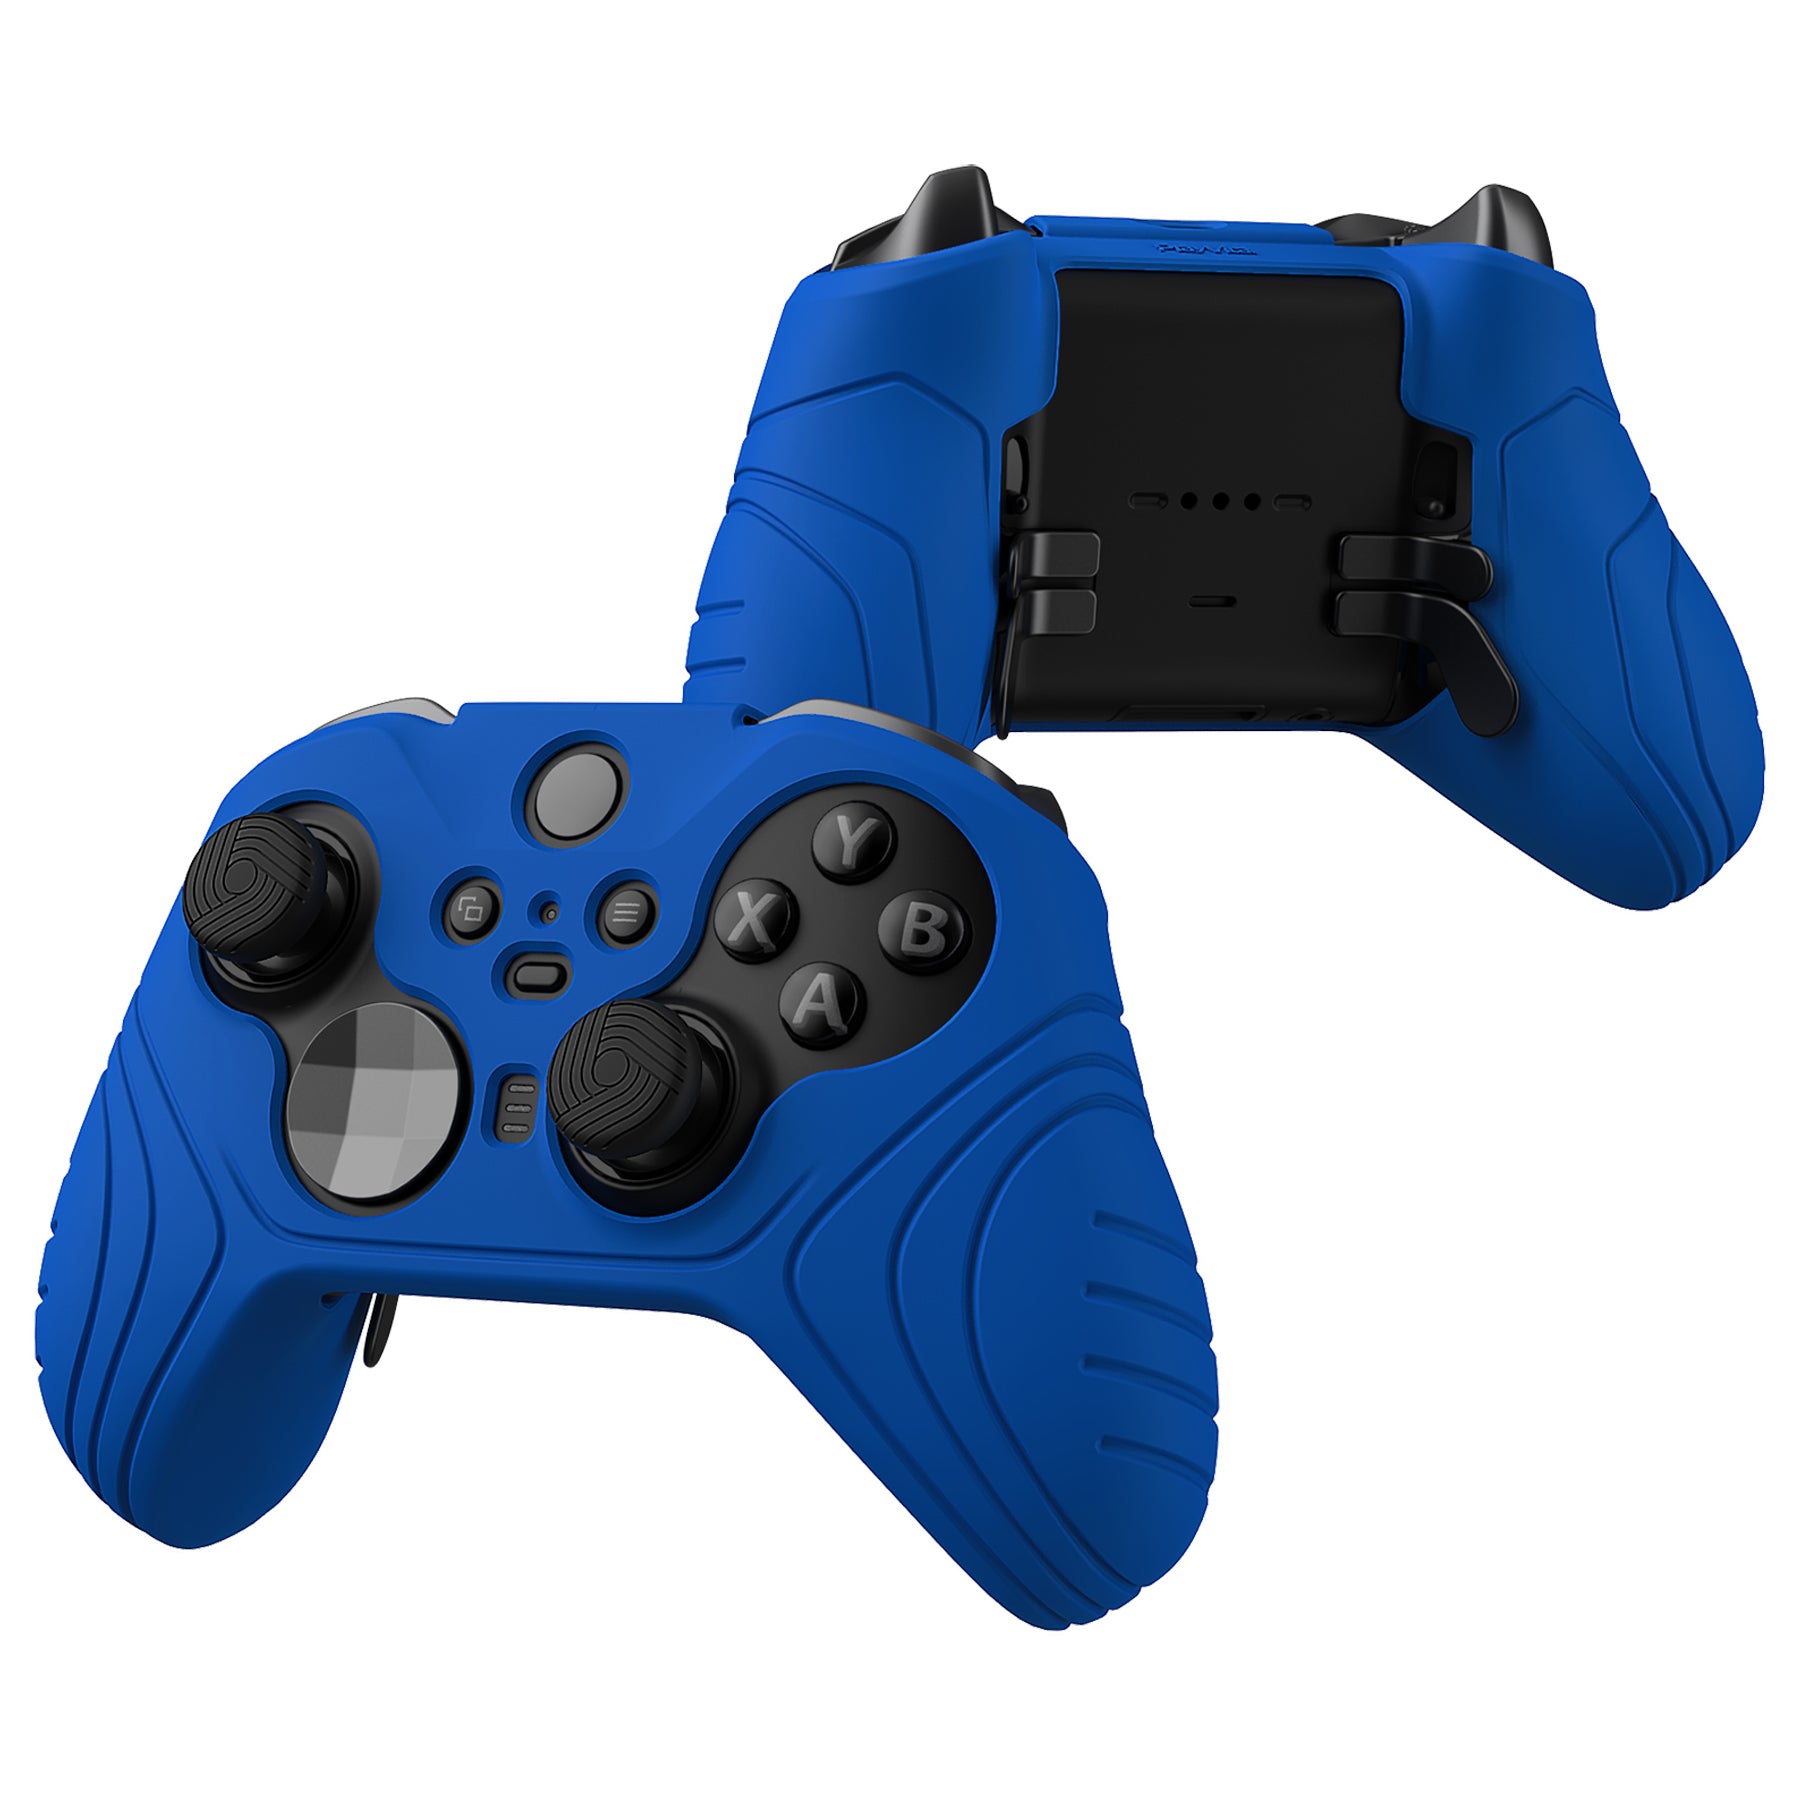 PlayVital Samurai Edition Anti Slip Silicone Case Cover for Xbox Elite Wireless Controller Series 2, Ergonomic Soft Rubber Skin Protector for Xbox Elite Series 2 with Thumb Grip Caps - Blue - XBE2M008 playvital